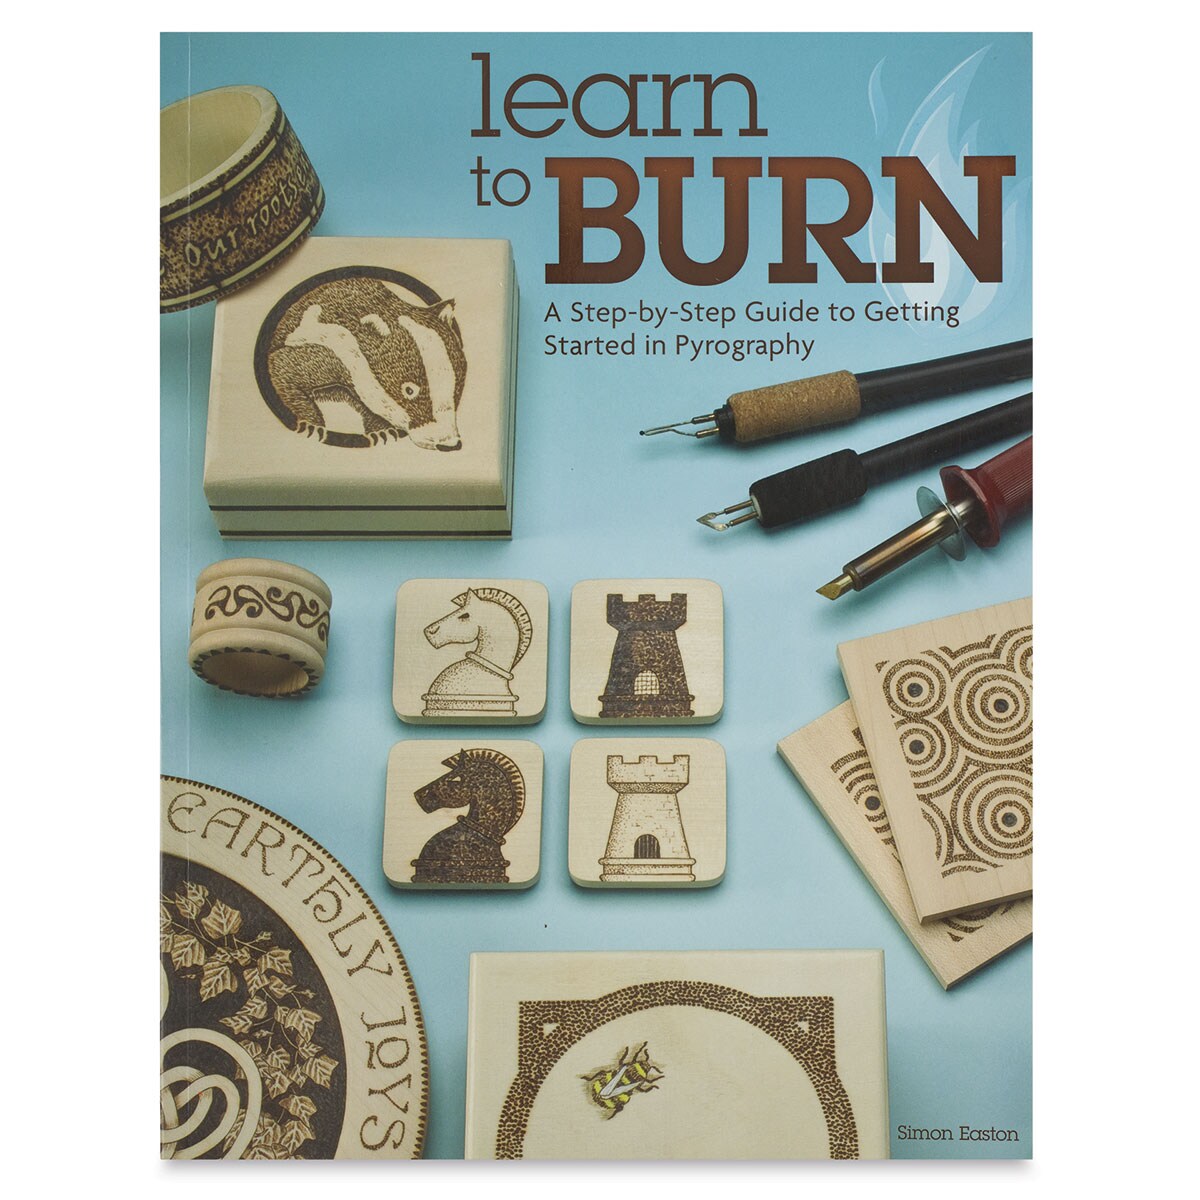 Learn To Burn: A Step-By-Step Guide to Getting Started in Pyrography